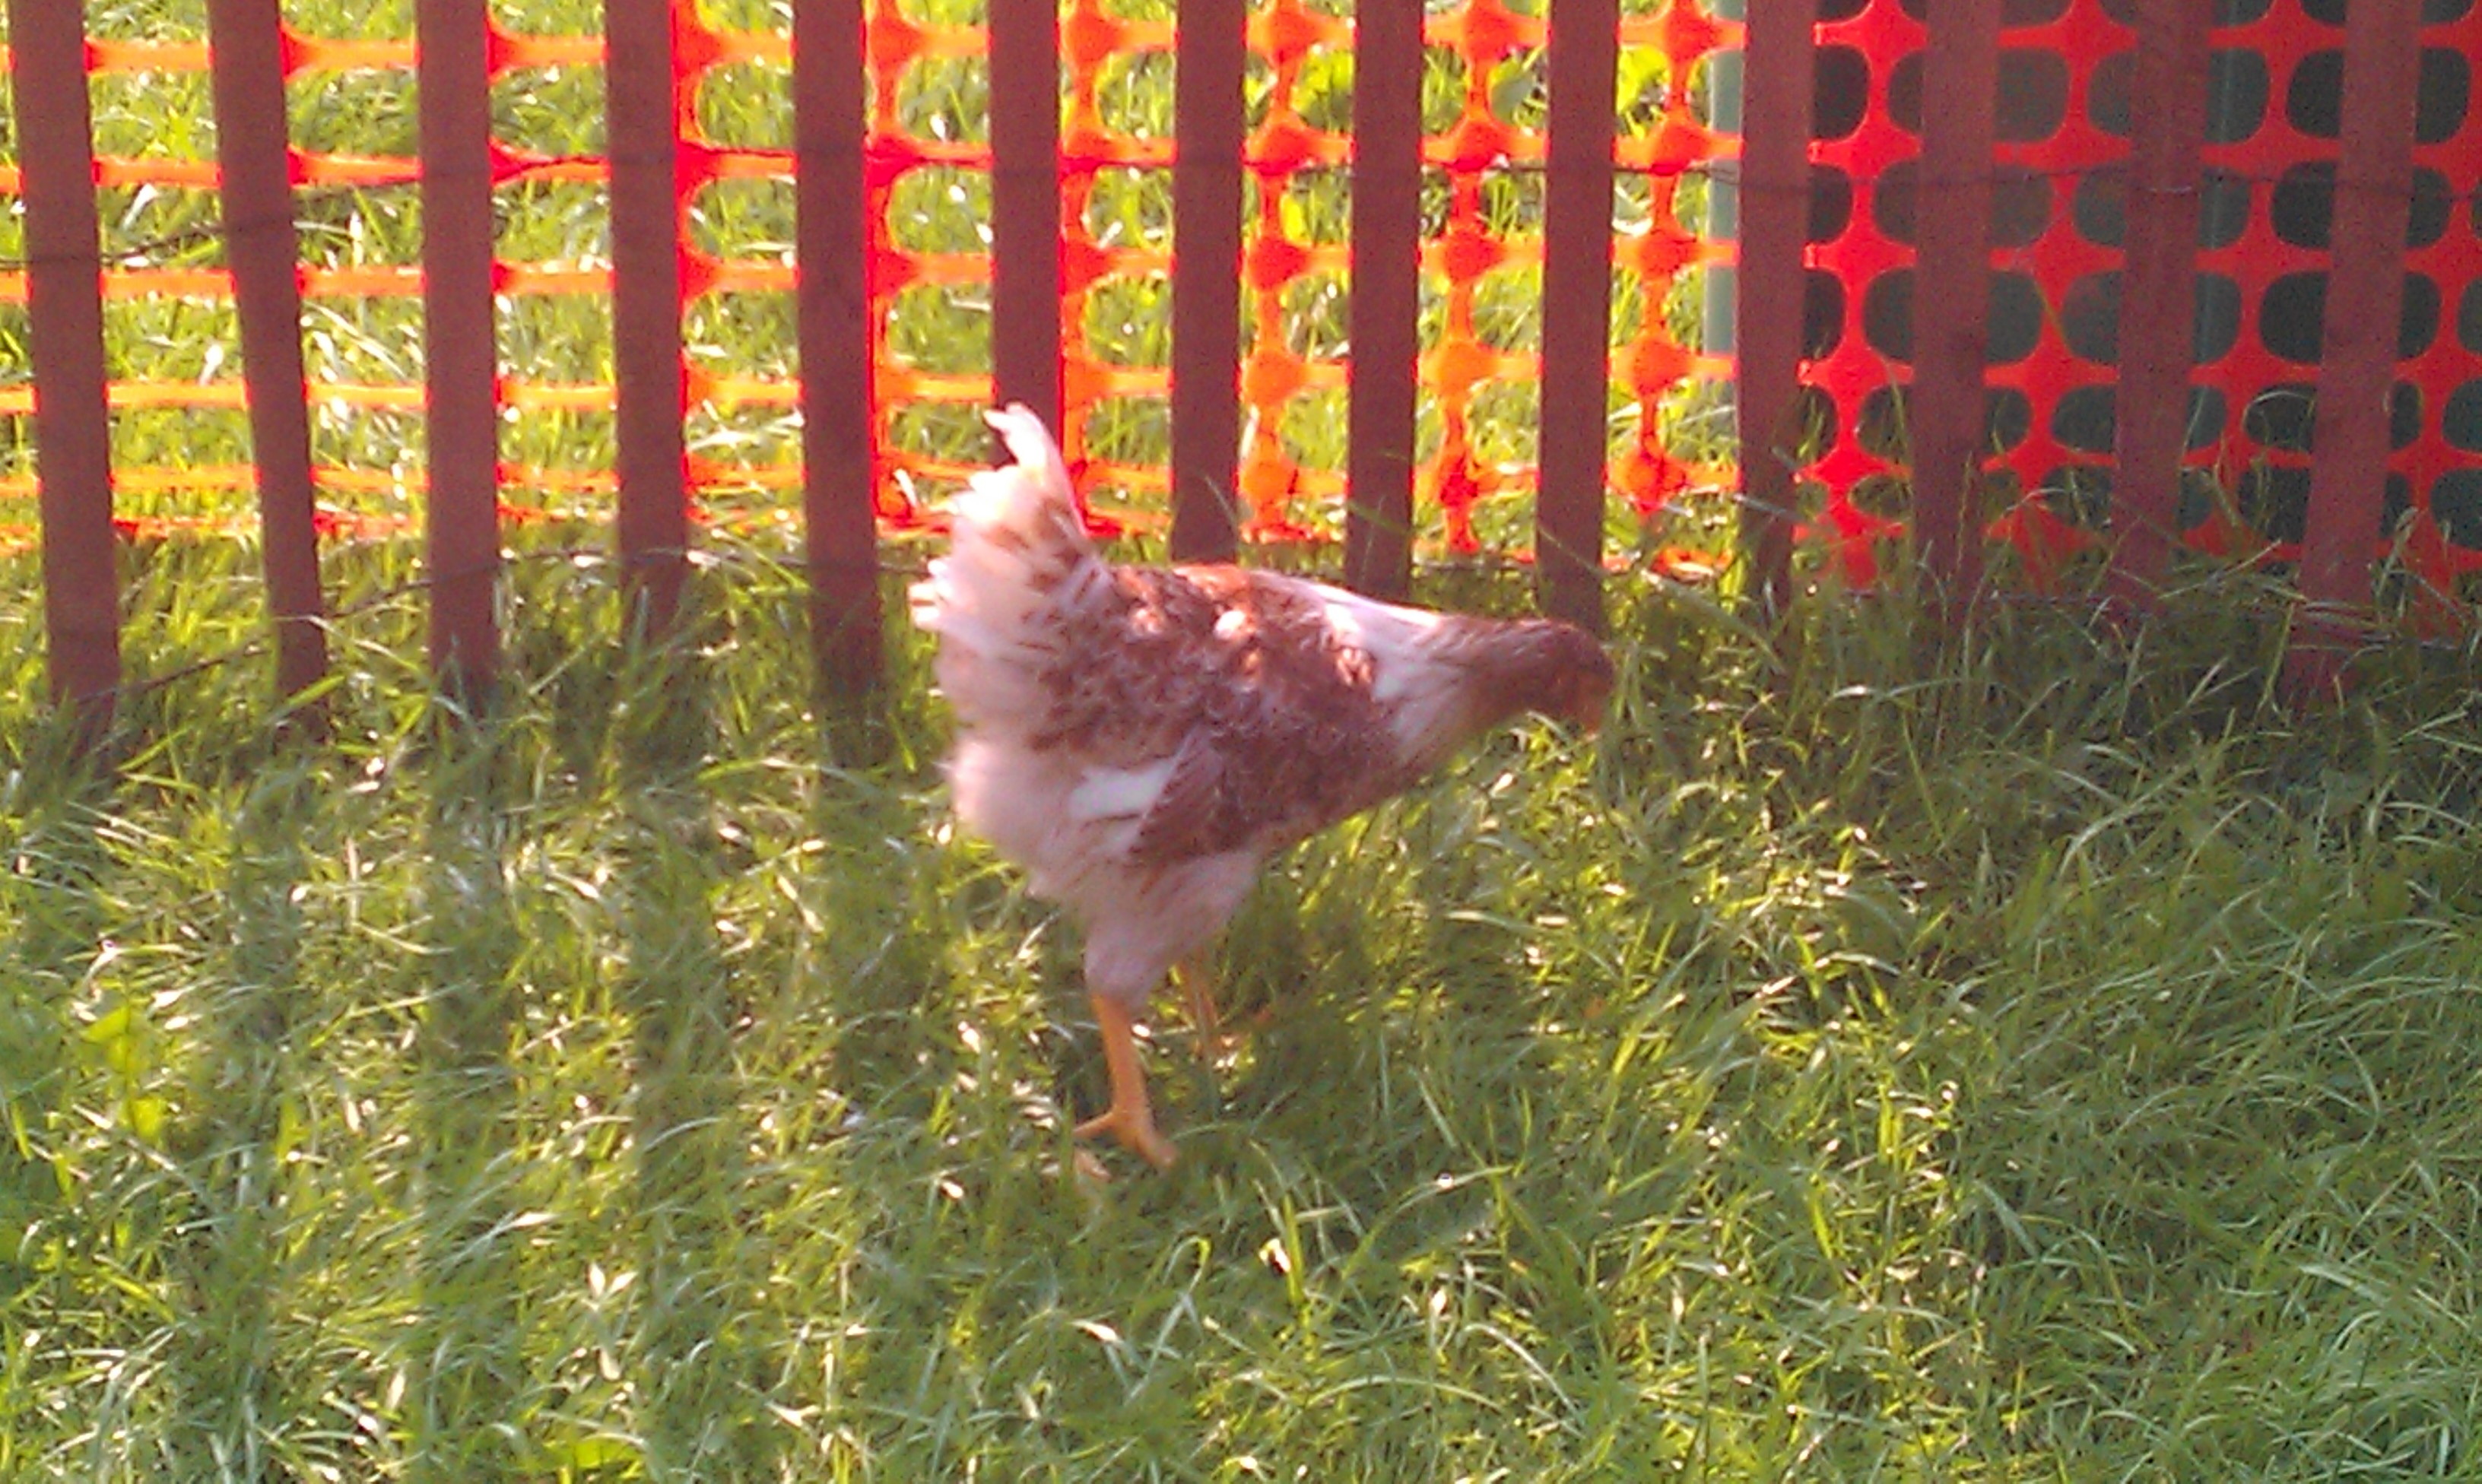 This is the smallest of my flock, but still beautiful, Roxanne. At least I think she's a girl.